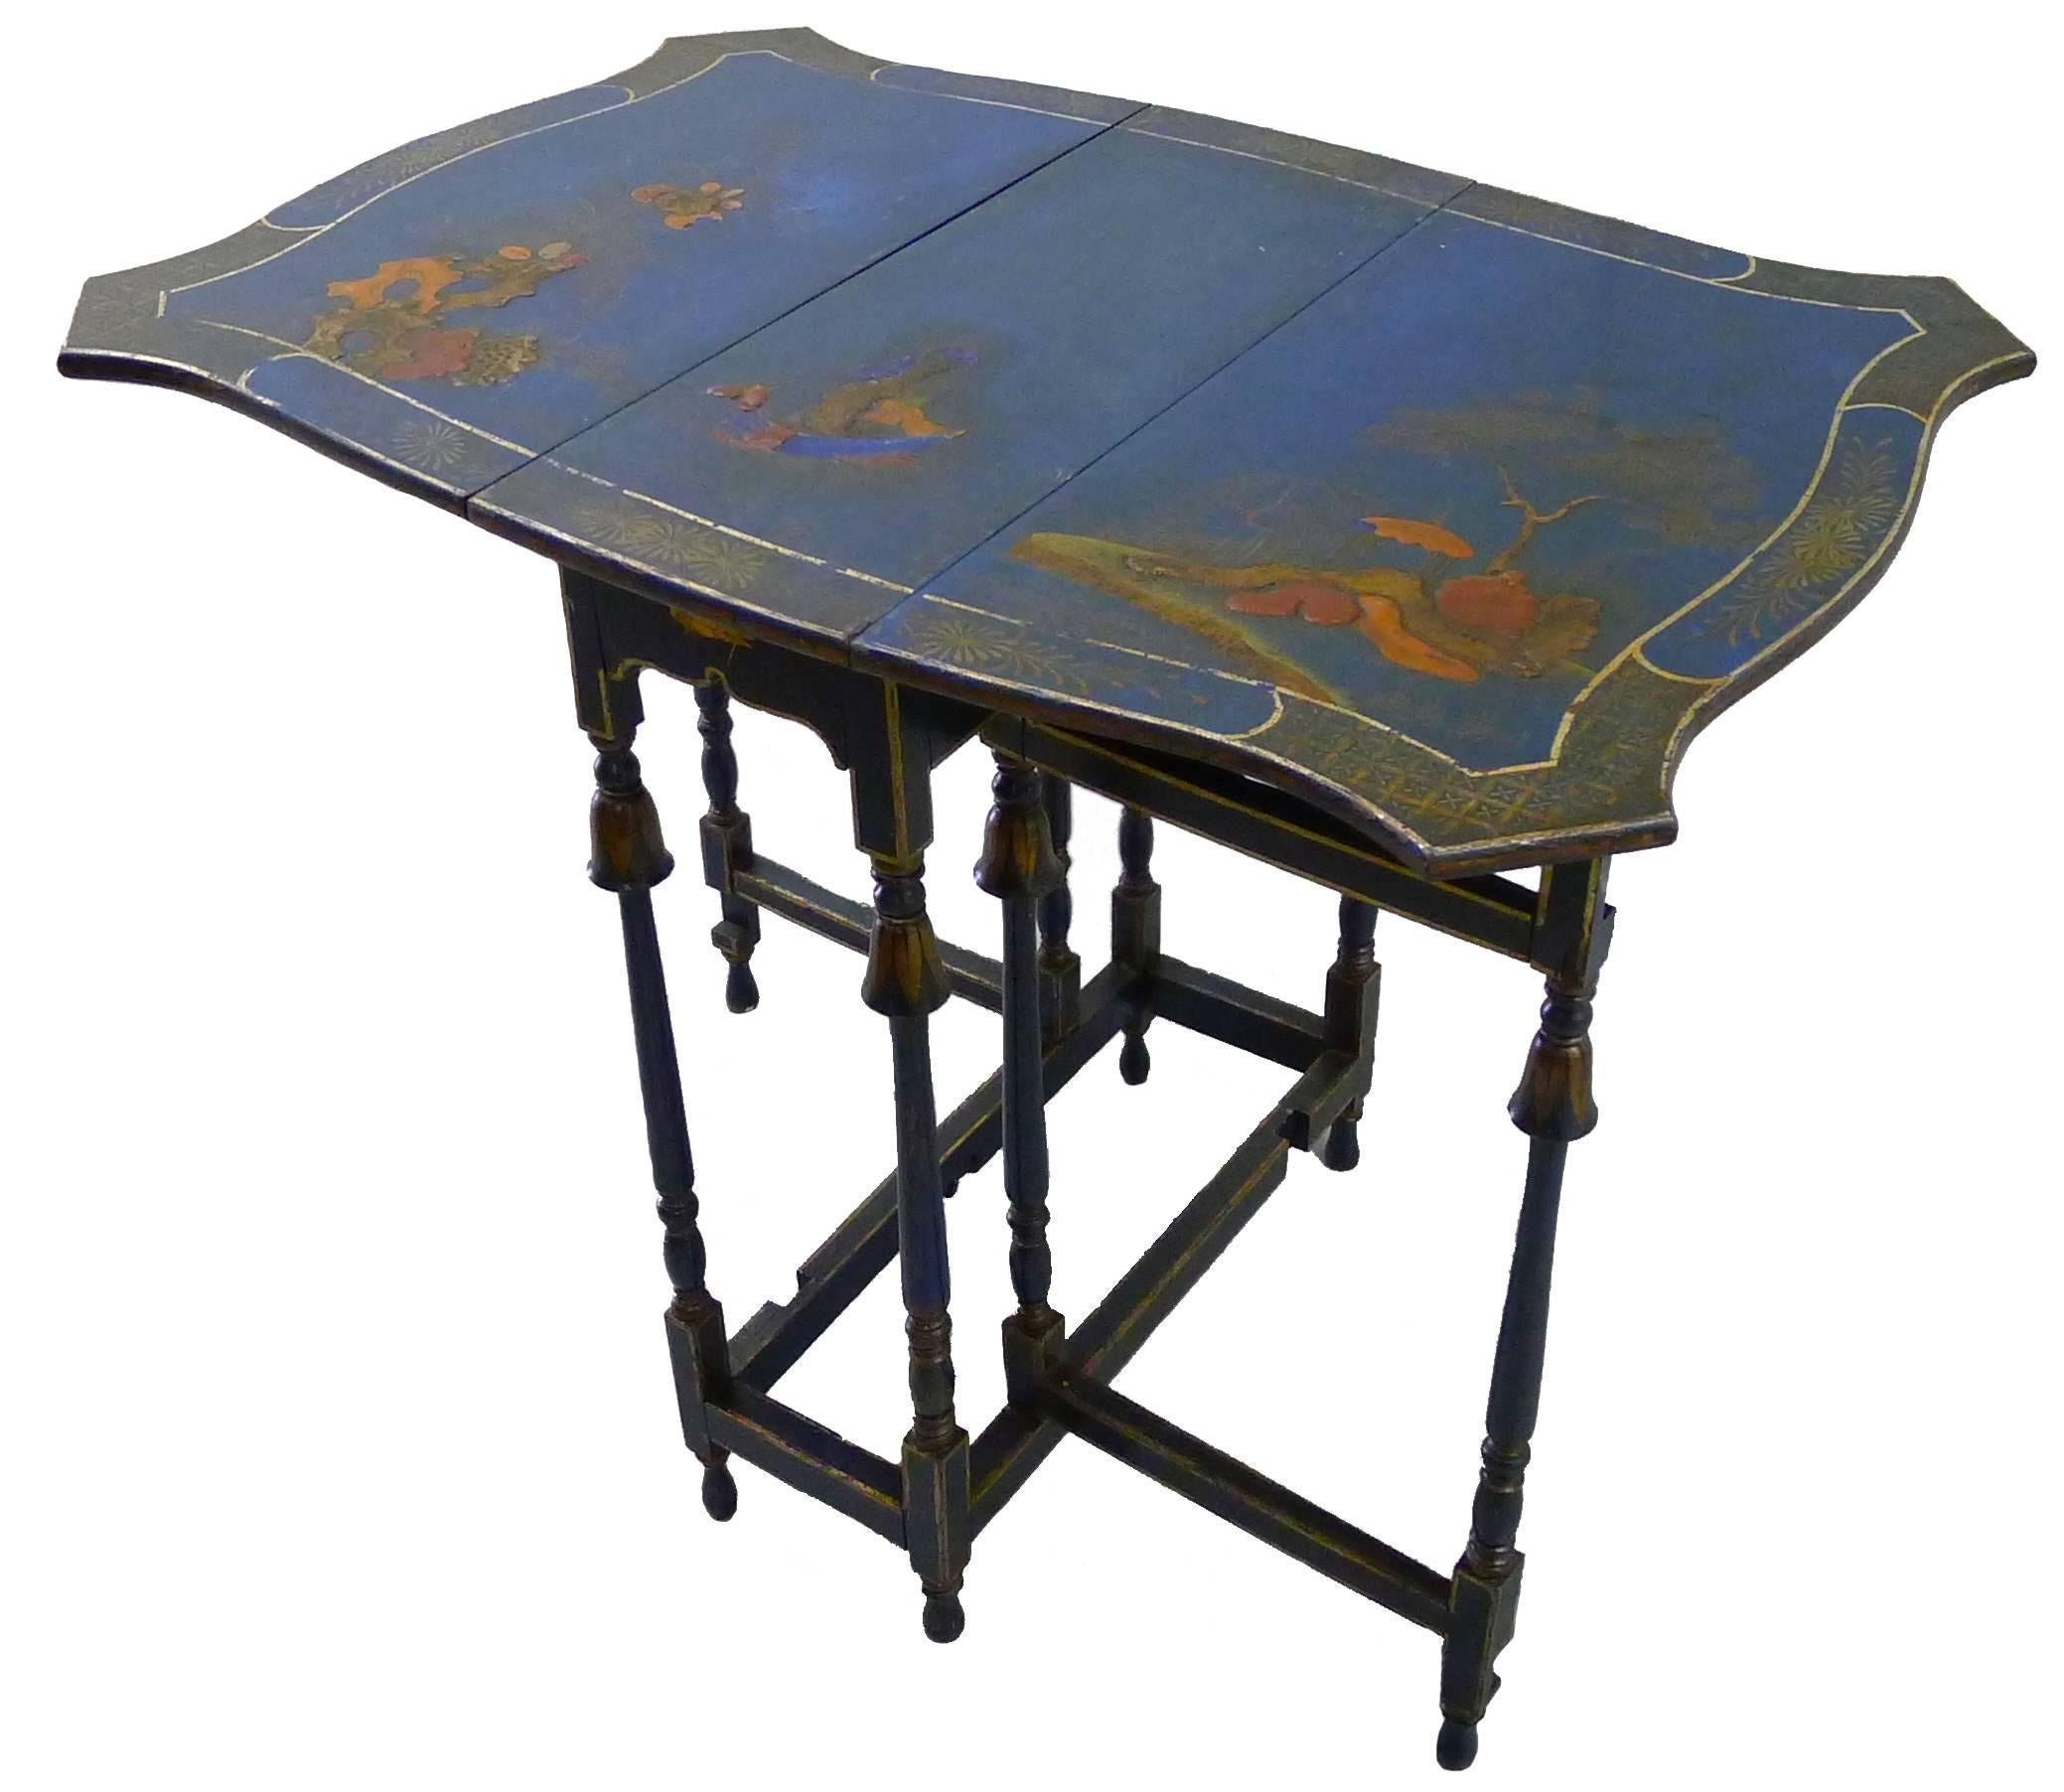 Chinese Export-Style Chinoiserie Gate-Leg Drop Leaf Tea Table In Good Condition For Sale In Stamford, CT